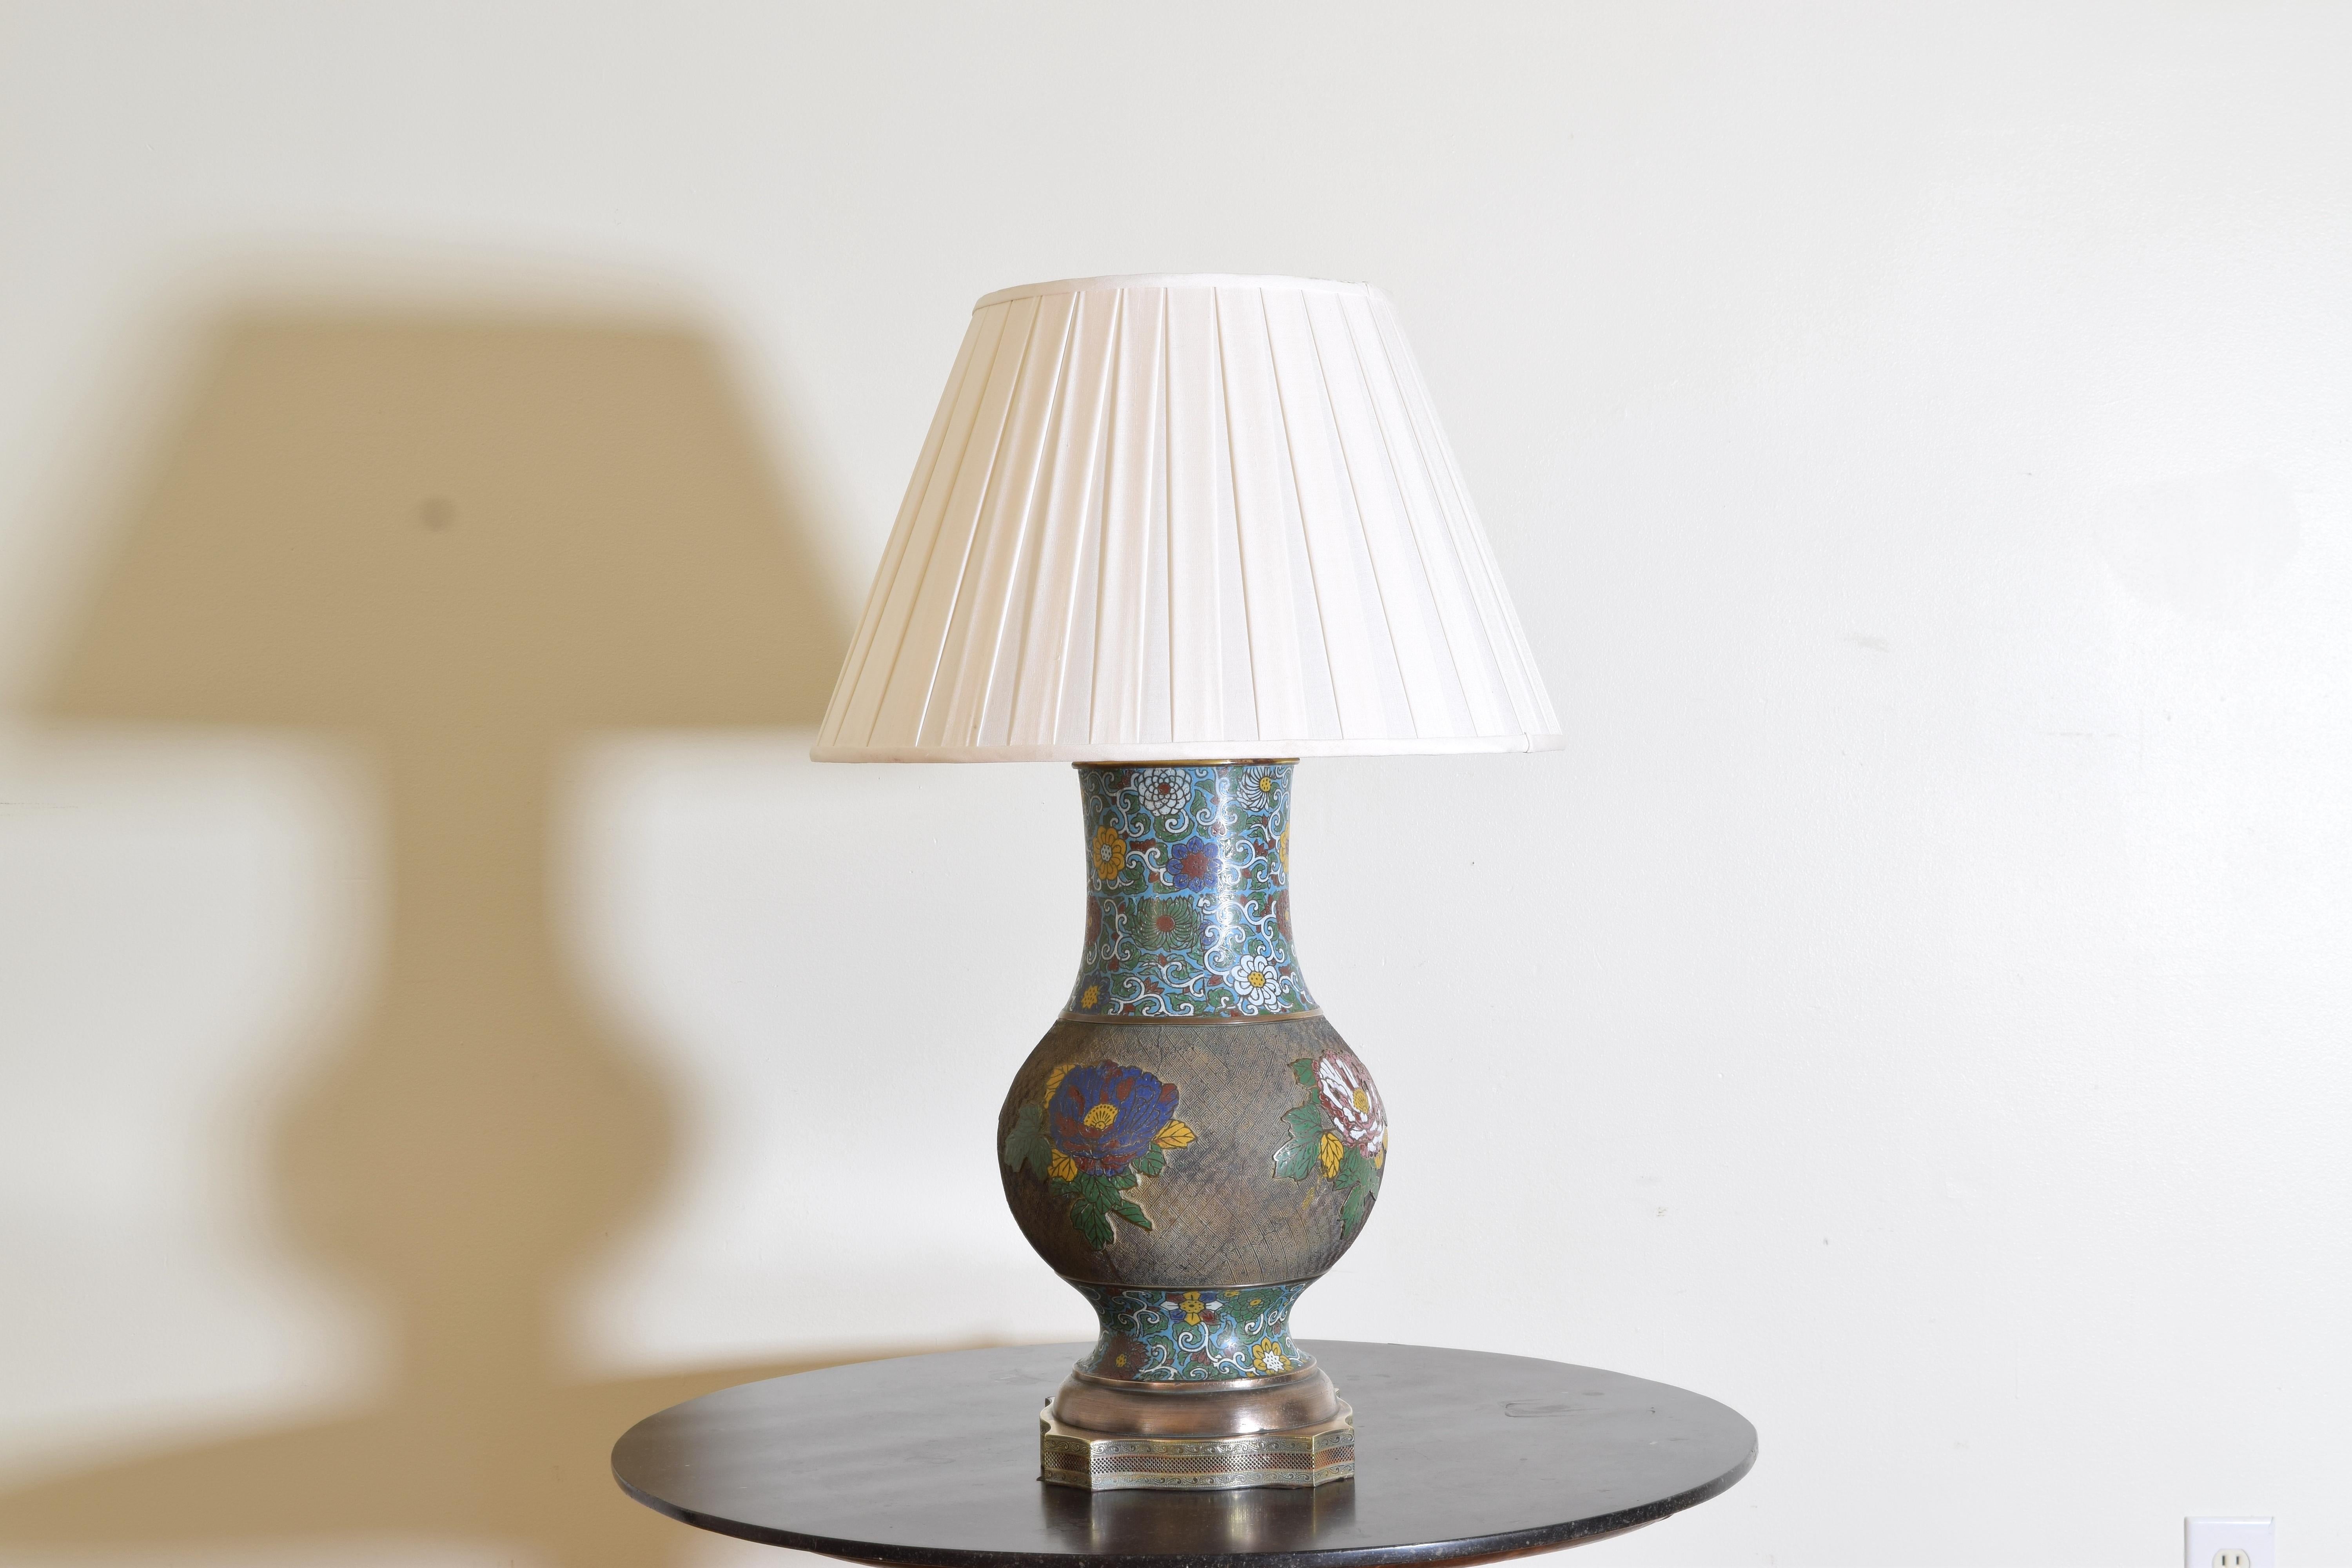 The textured brass body with enameled flowers and raised on a decorative pierced brass base, height is measured to top of silk pleated shade, height of lamp is 20 inches.